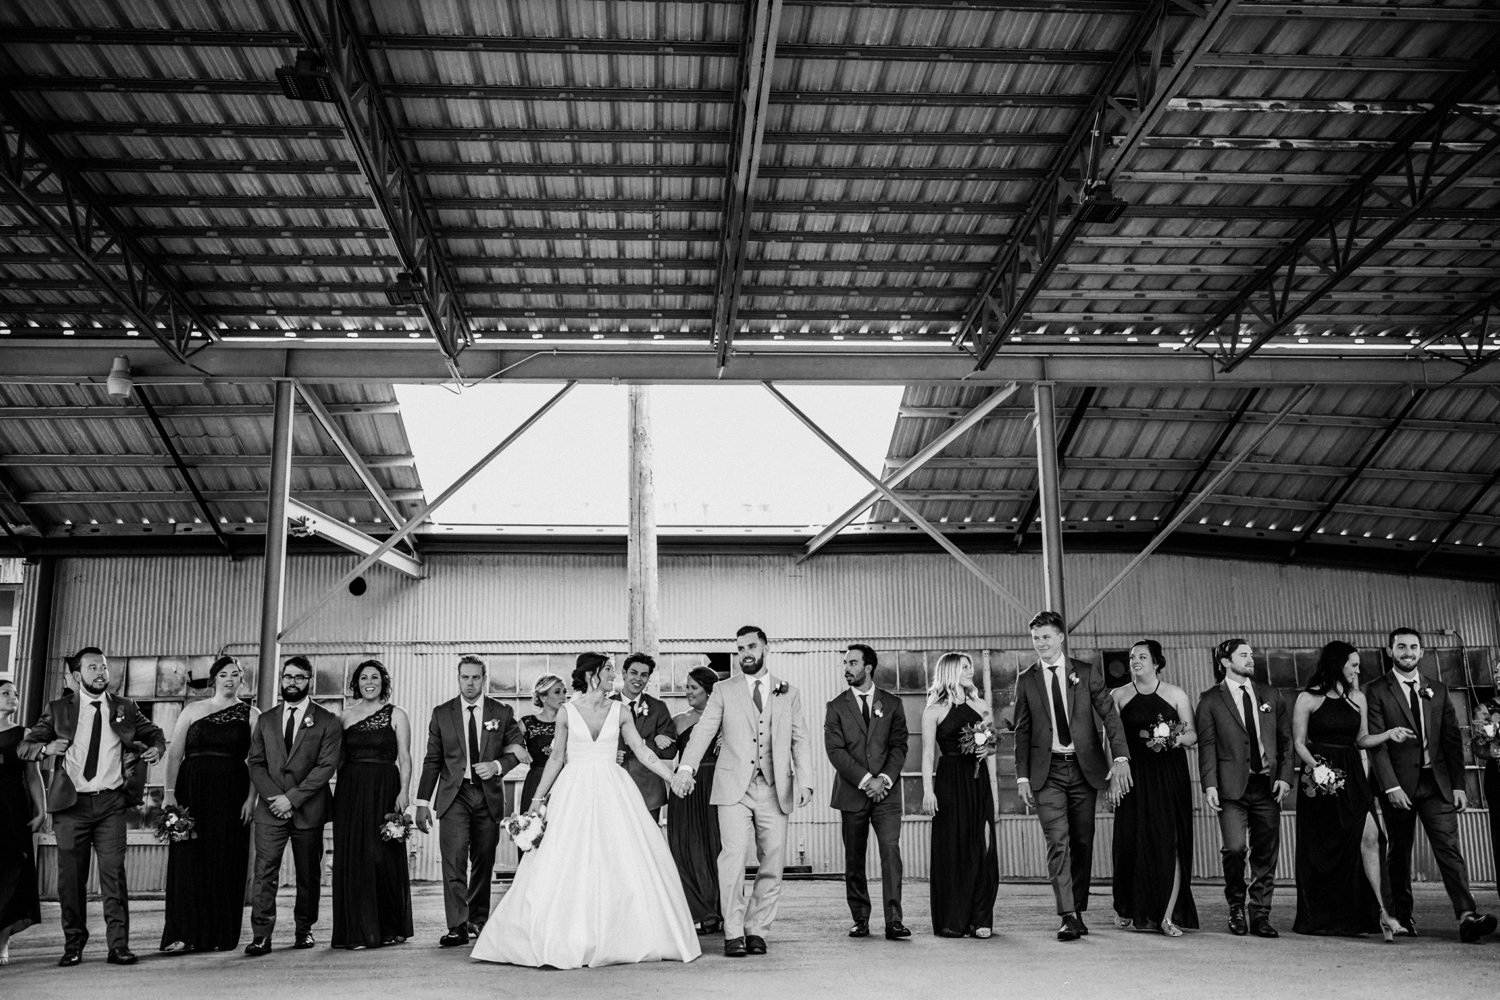  images by feliciathephotographer.com | destination wedding photographer | kansas city | spring time | bridal party | black and white | best friends | family | candid | satin a line dress | david's bridal | grey suits | the black tux | candid | industrial | modern | warehouse | 